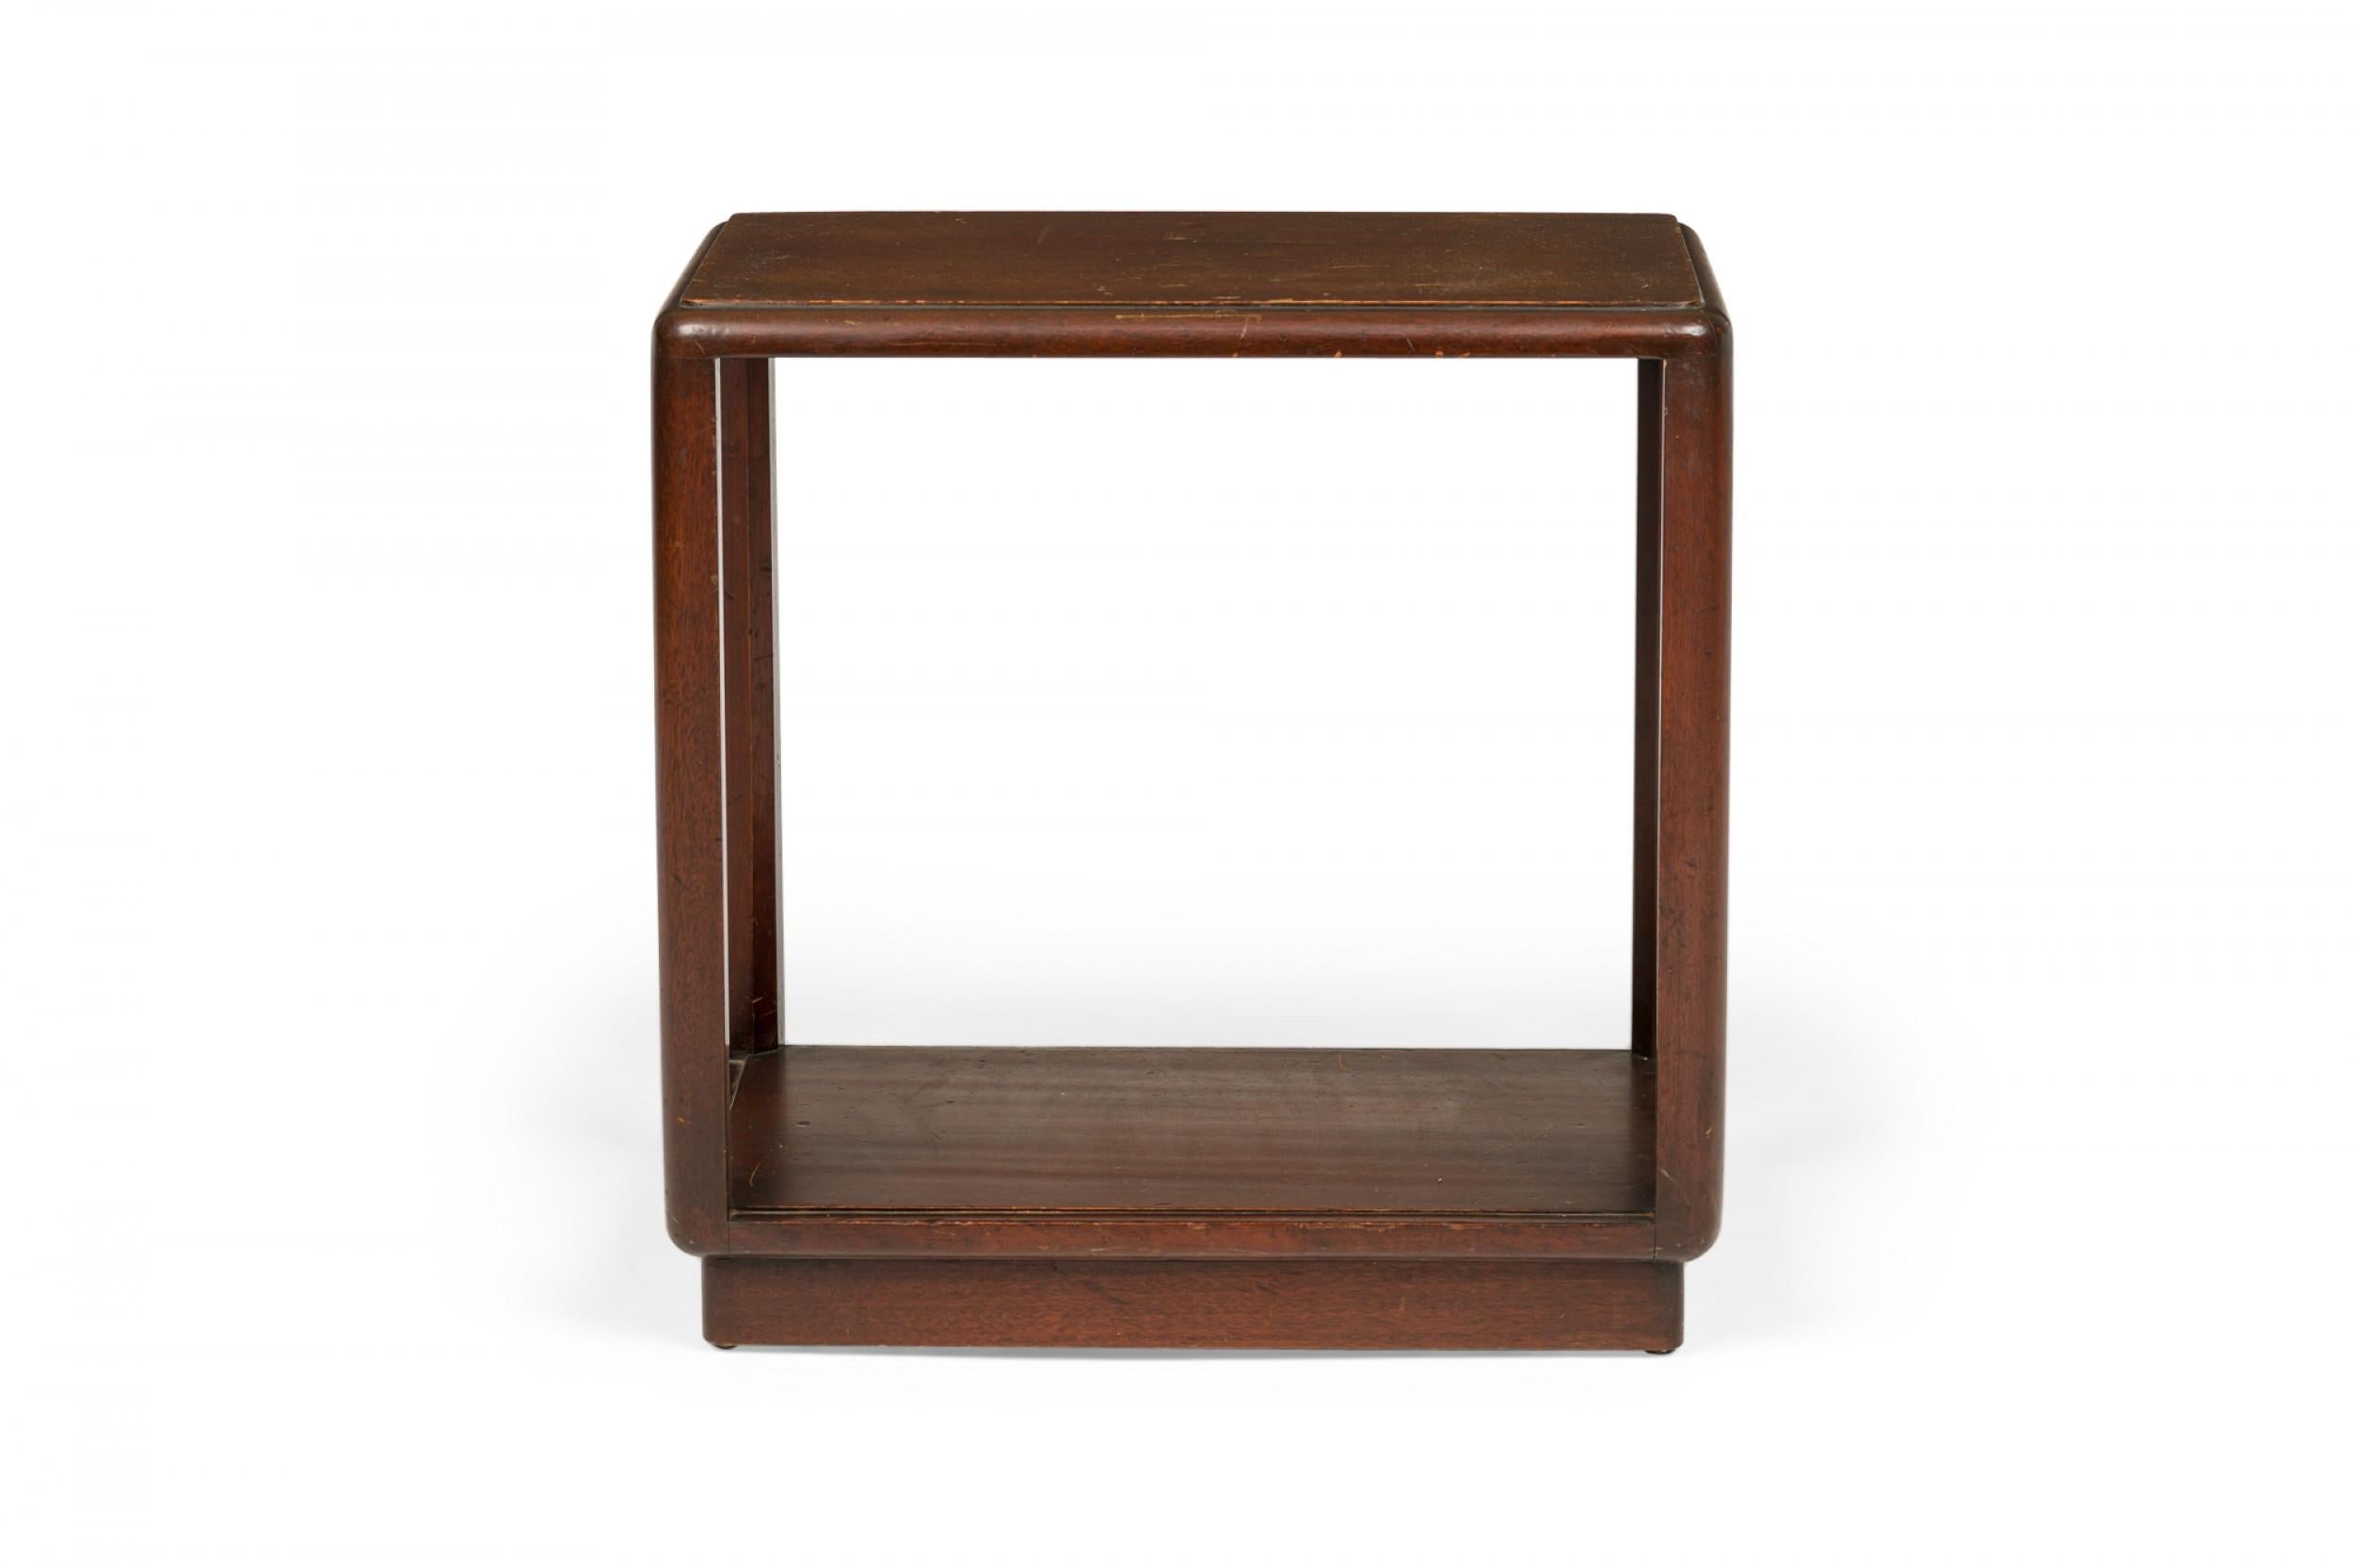 PAIR of American Mid-Century dark wood end / side tables with rectangular tops with rounded corners, pedestal bases, and an open frame design. (EDWARD WORMLEY FOR DUNBAR FURNITURE COMPANY)(PRICED AS PAIR).